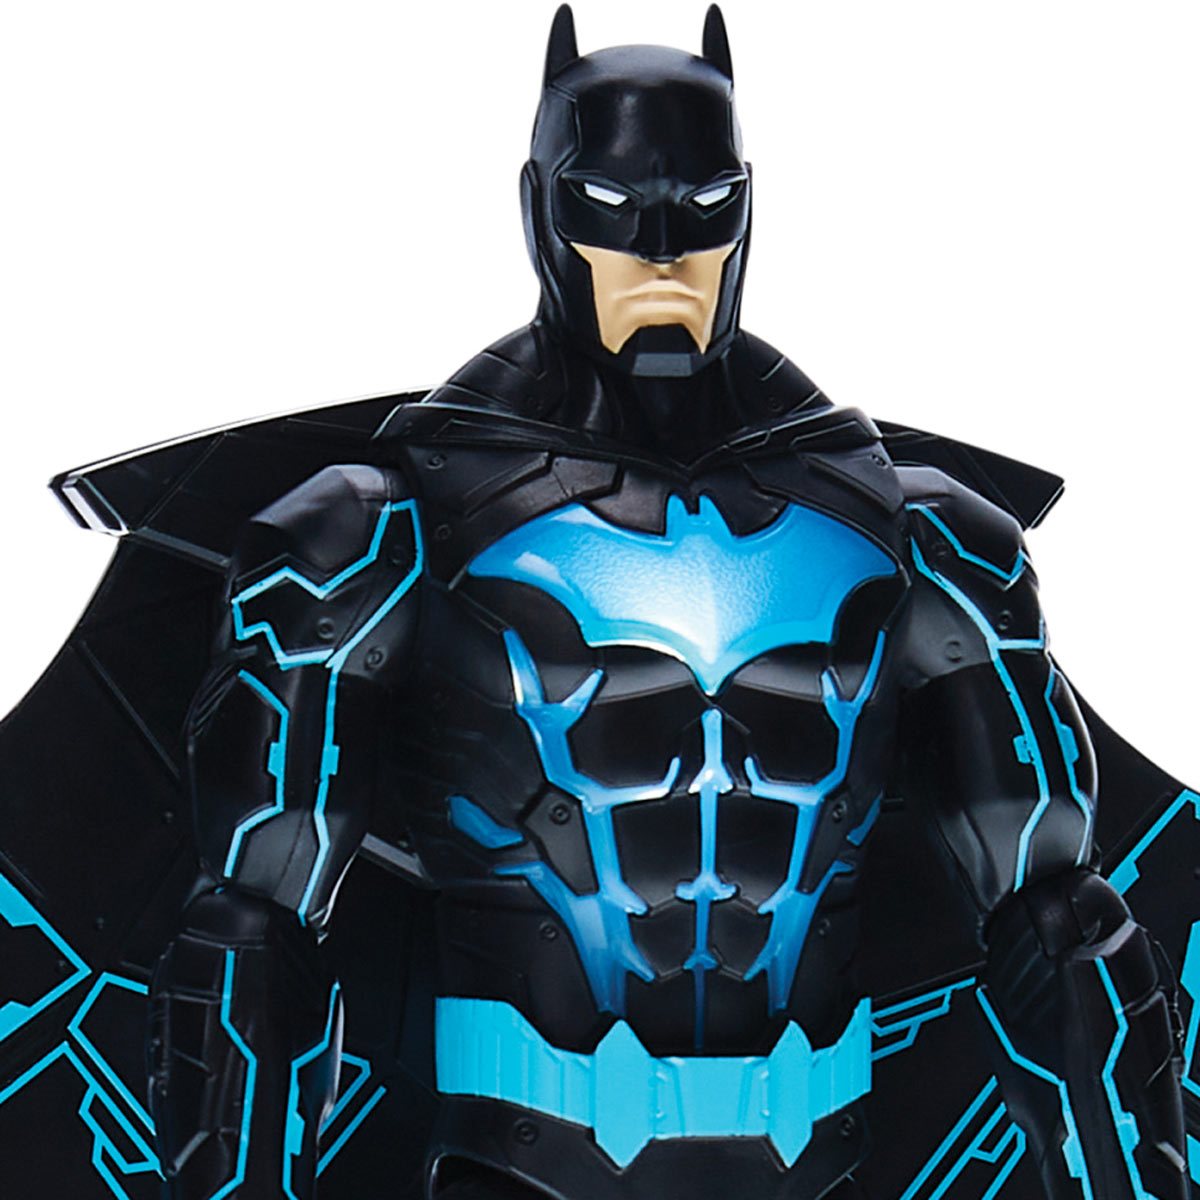 Batman Deluxe 12 Inch Action Figure With Rapid Change Utility Belt Lights And Sounds - shopping 2 to 4 years batman roblox or funko action